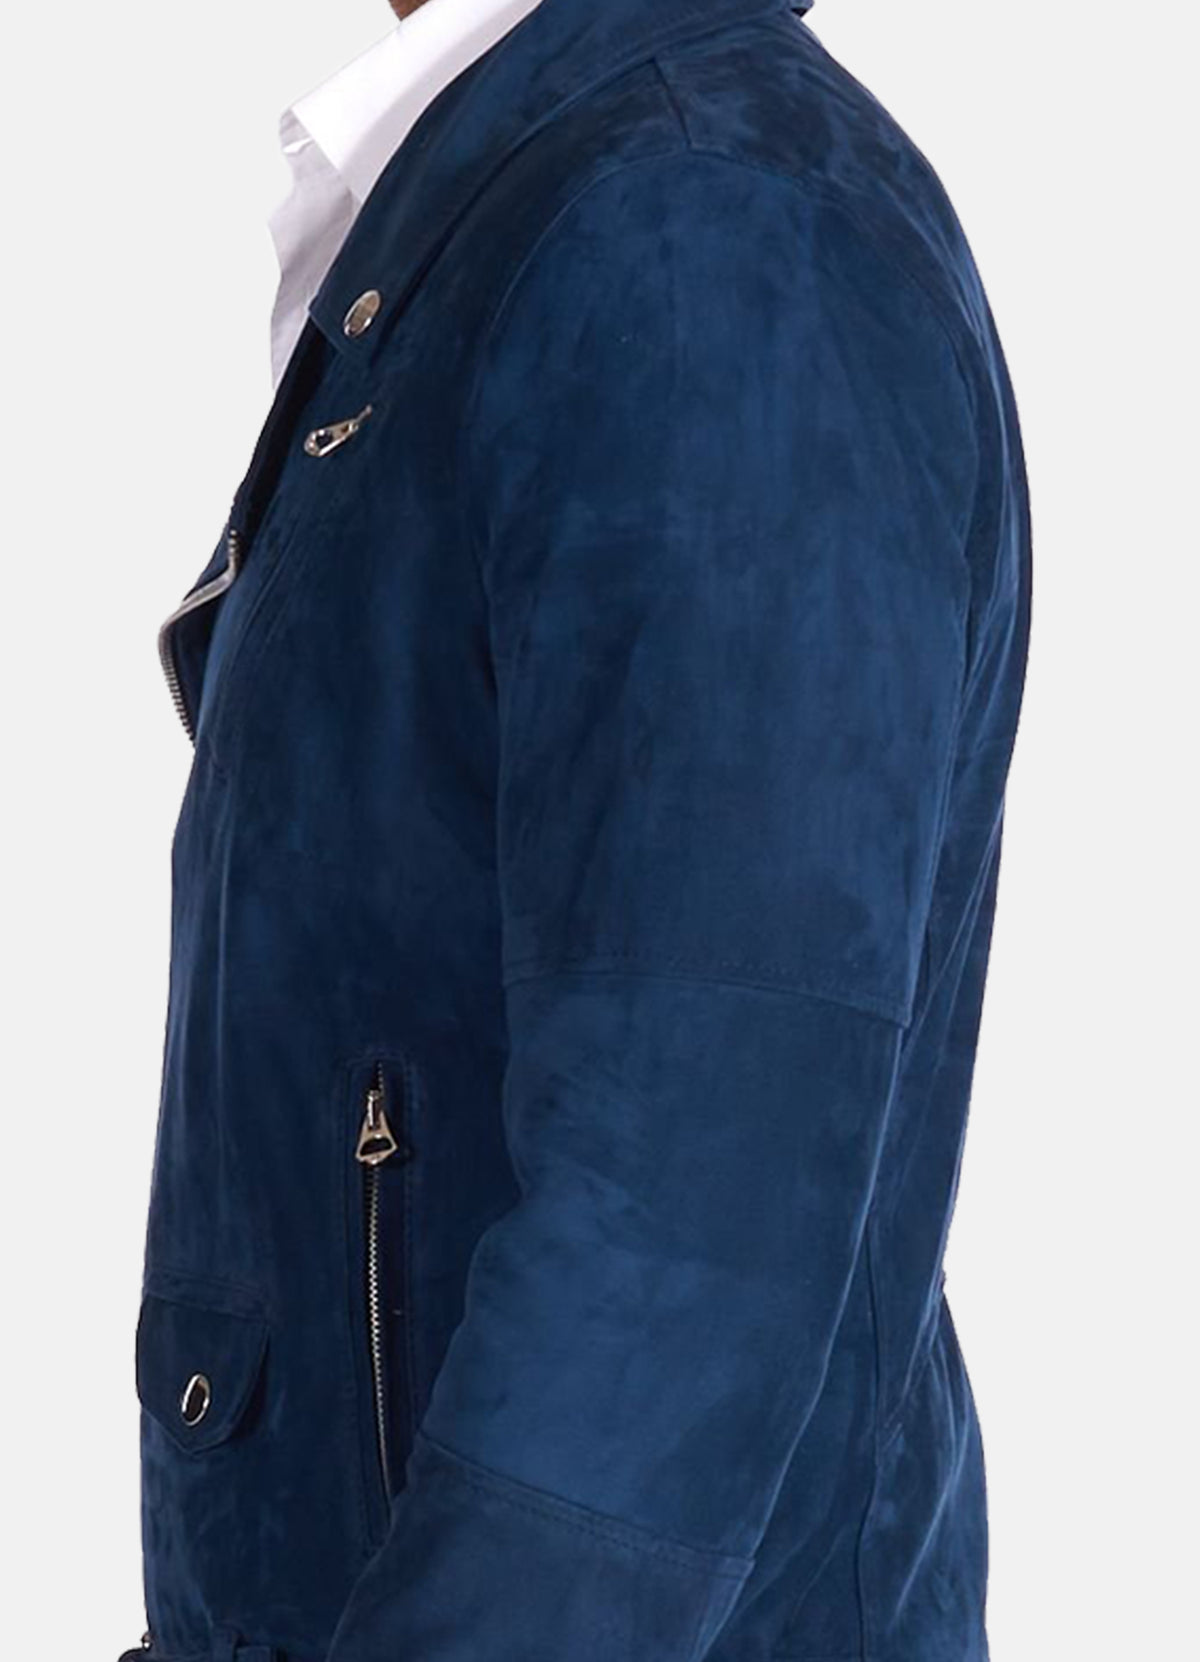 Mens Iconic Blue Suede Leather Jacket